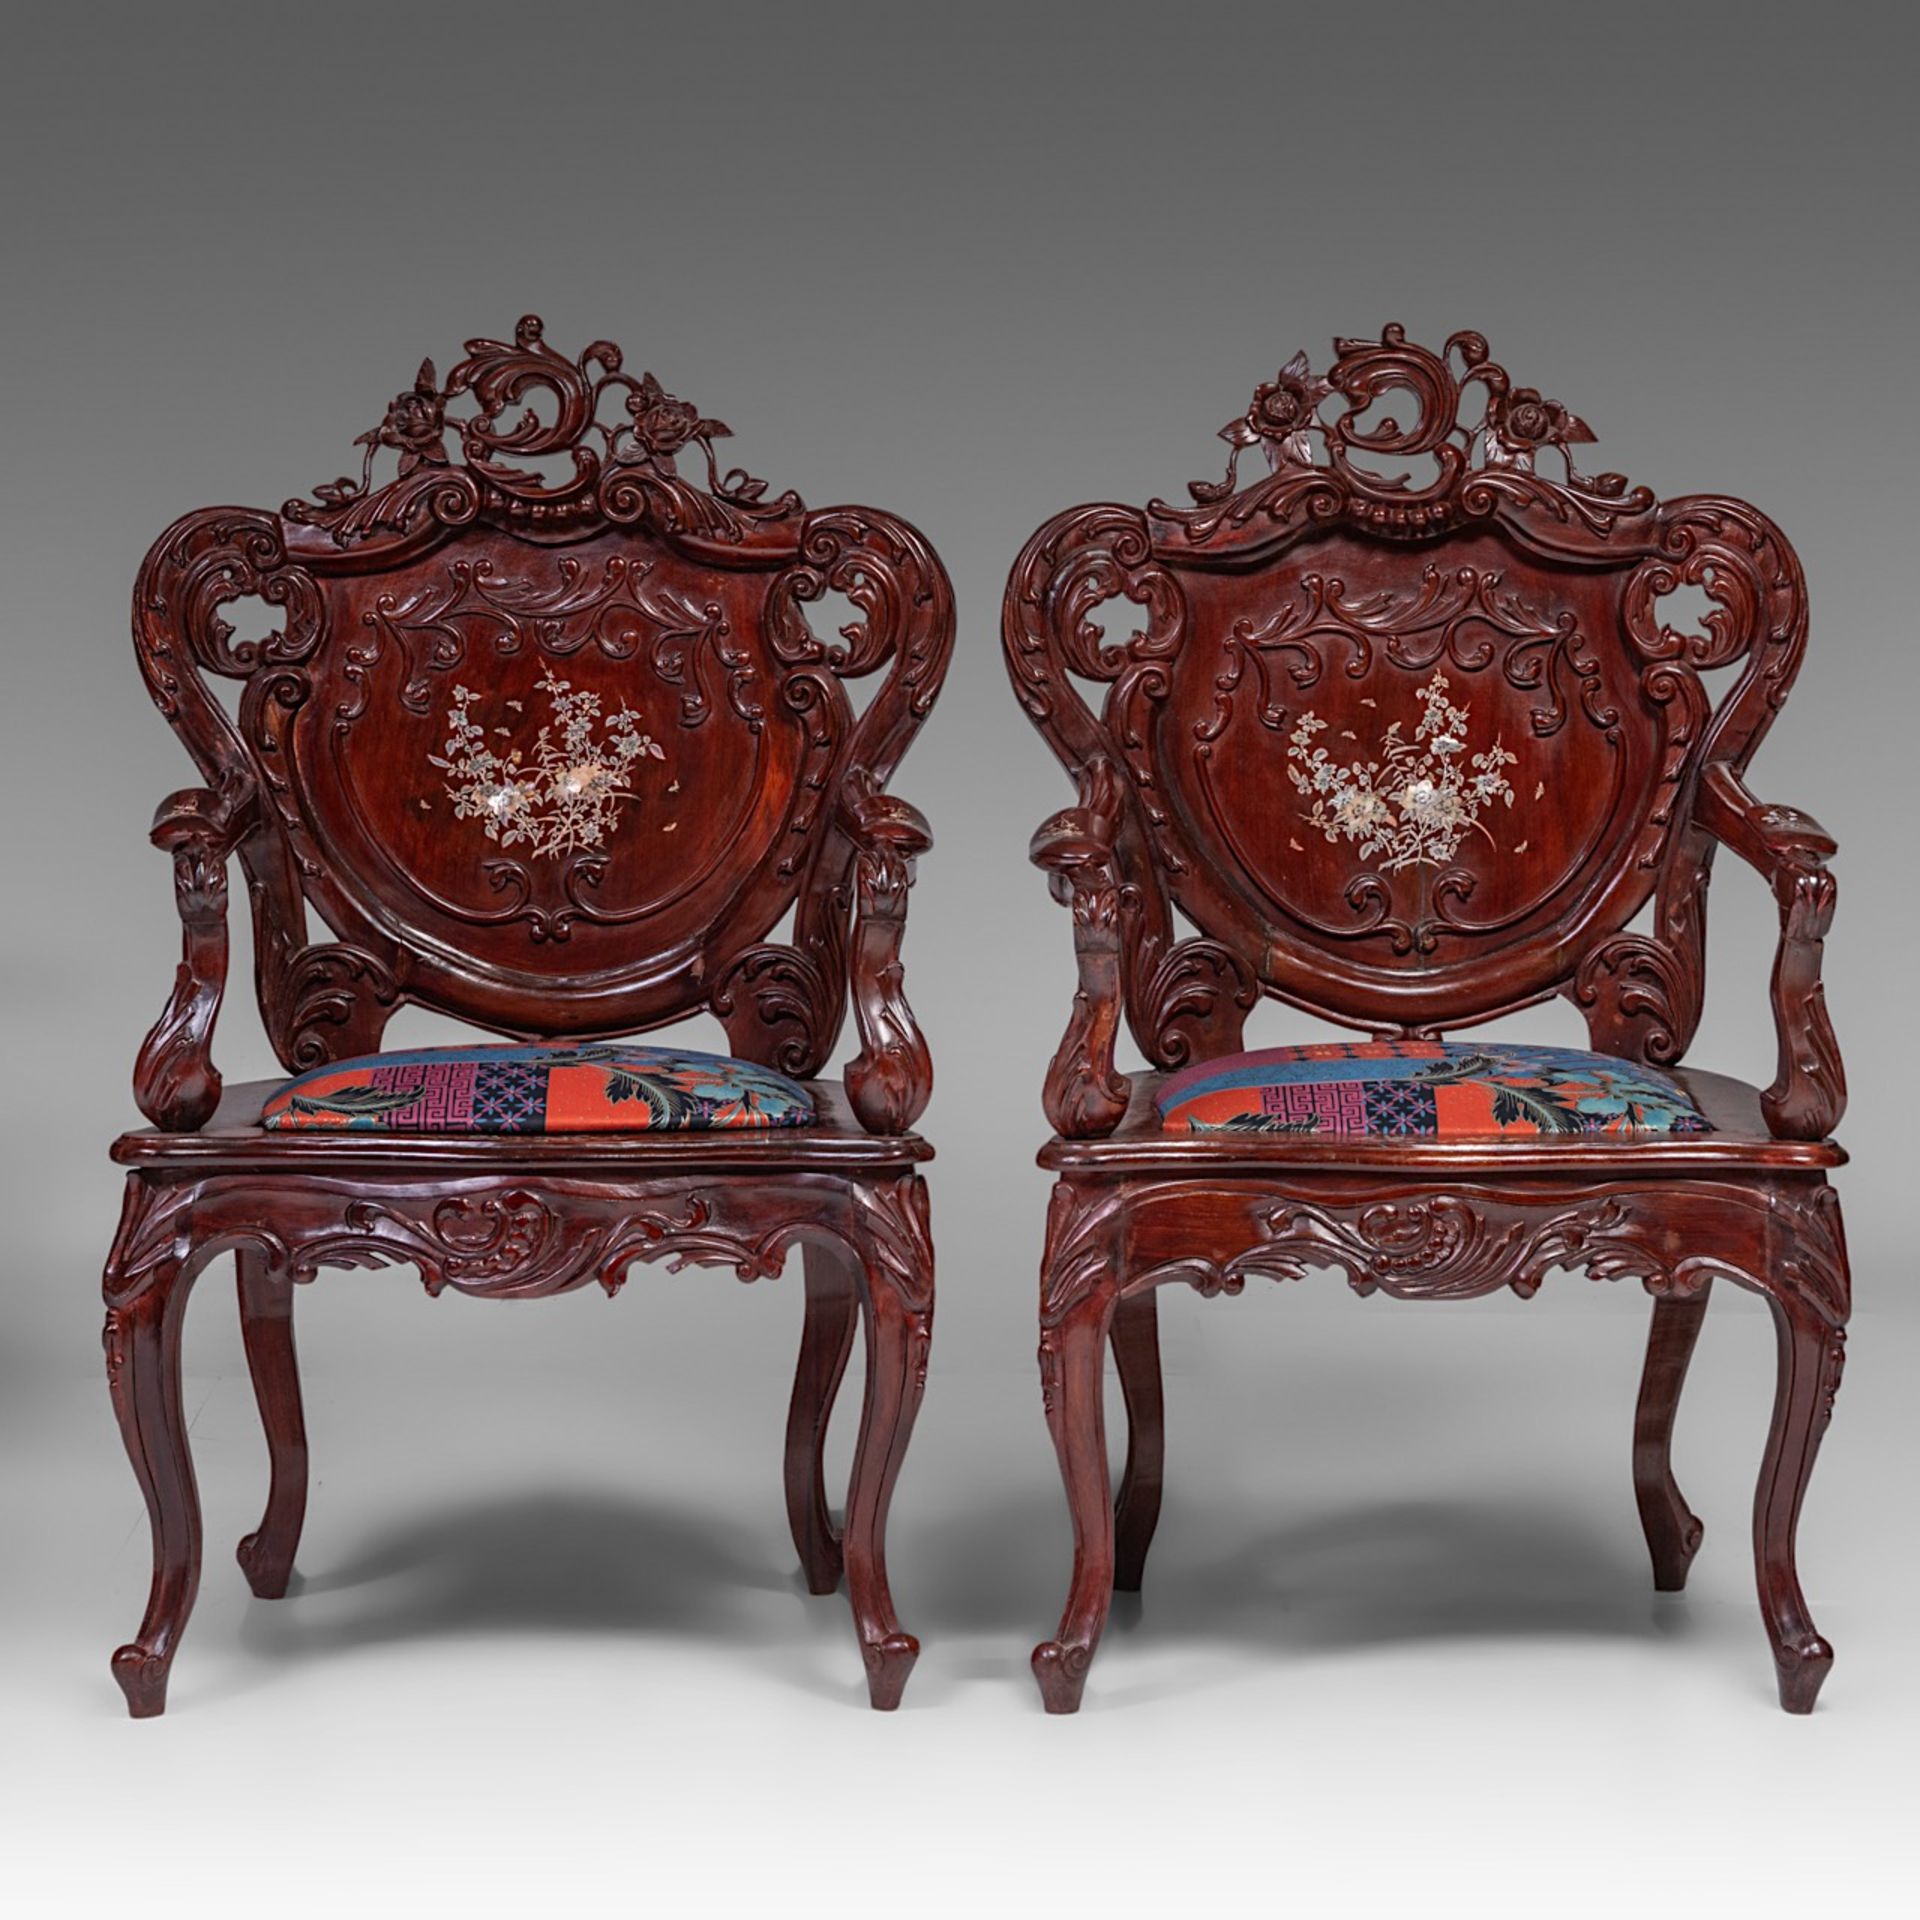 An Anglo-Chinese settee and two chairs, H settee 132 - H chair 108 cm - Image 7 of 24